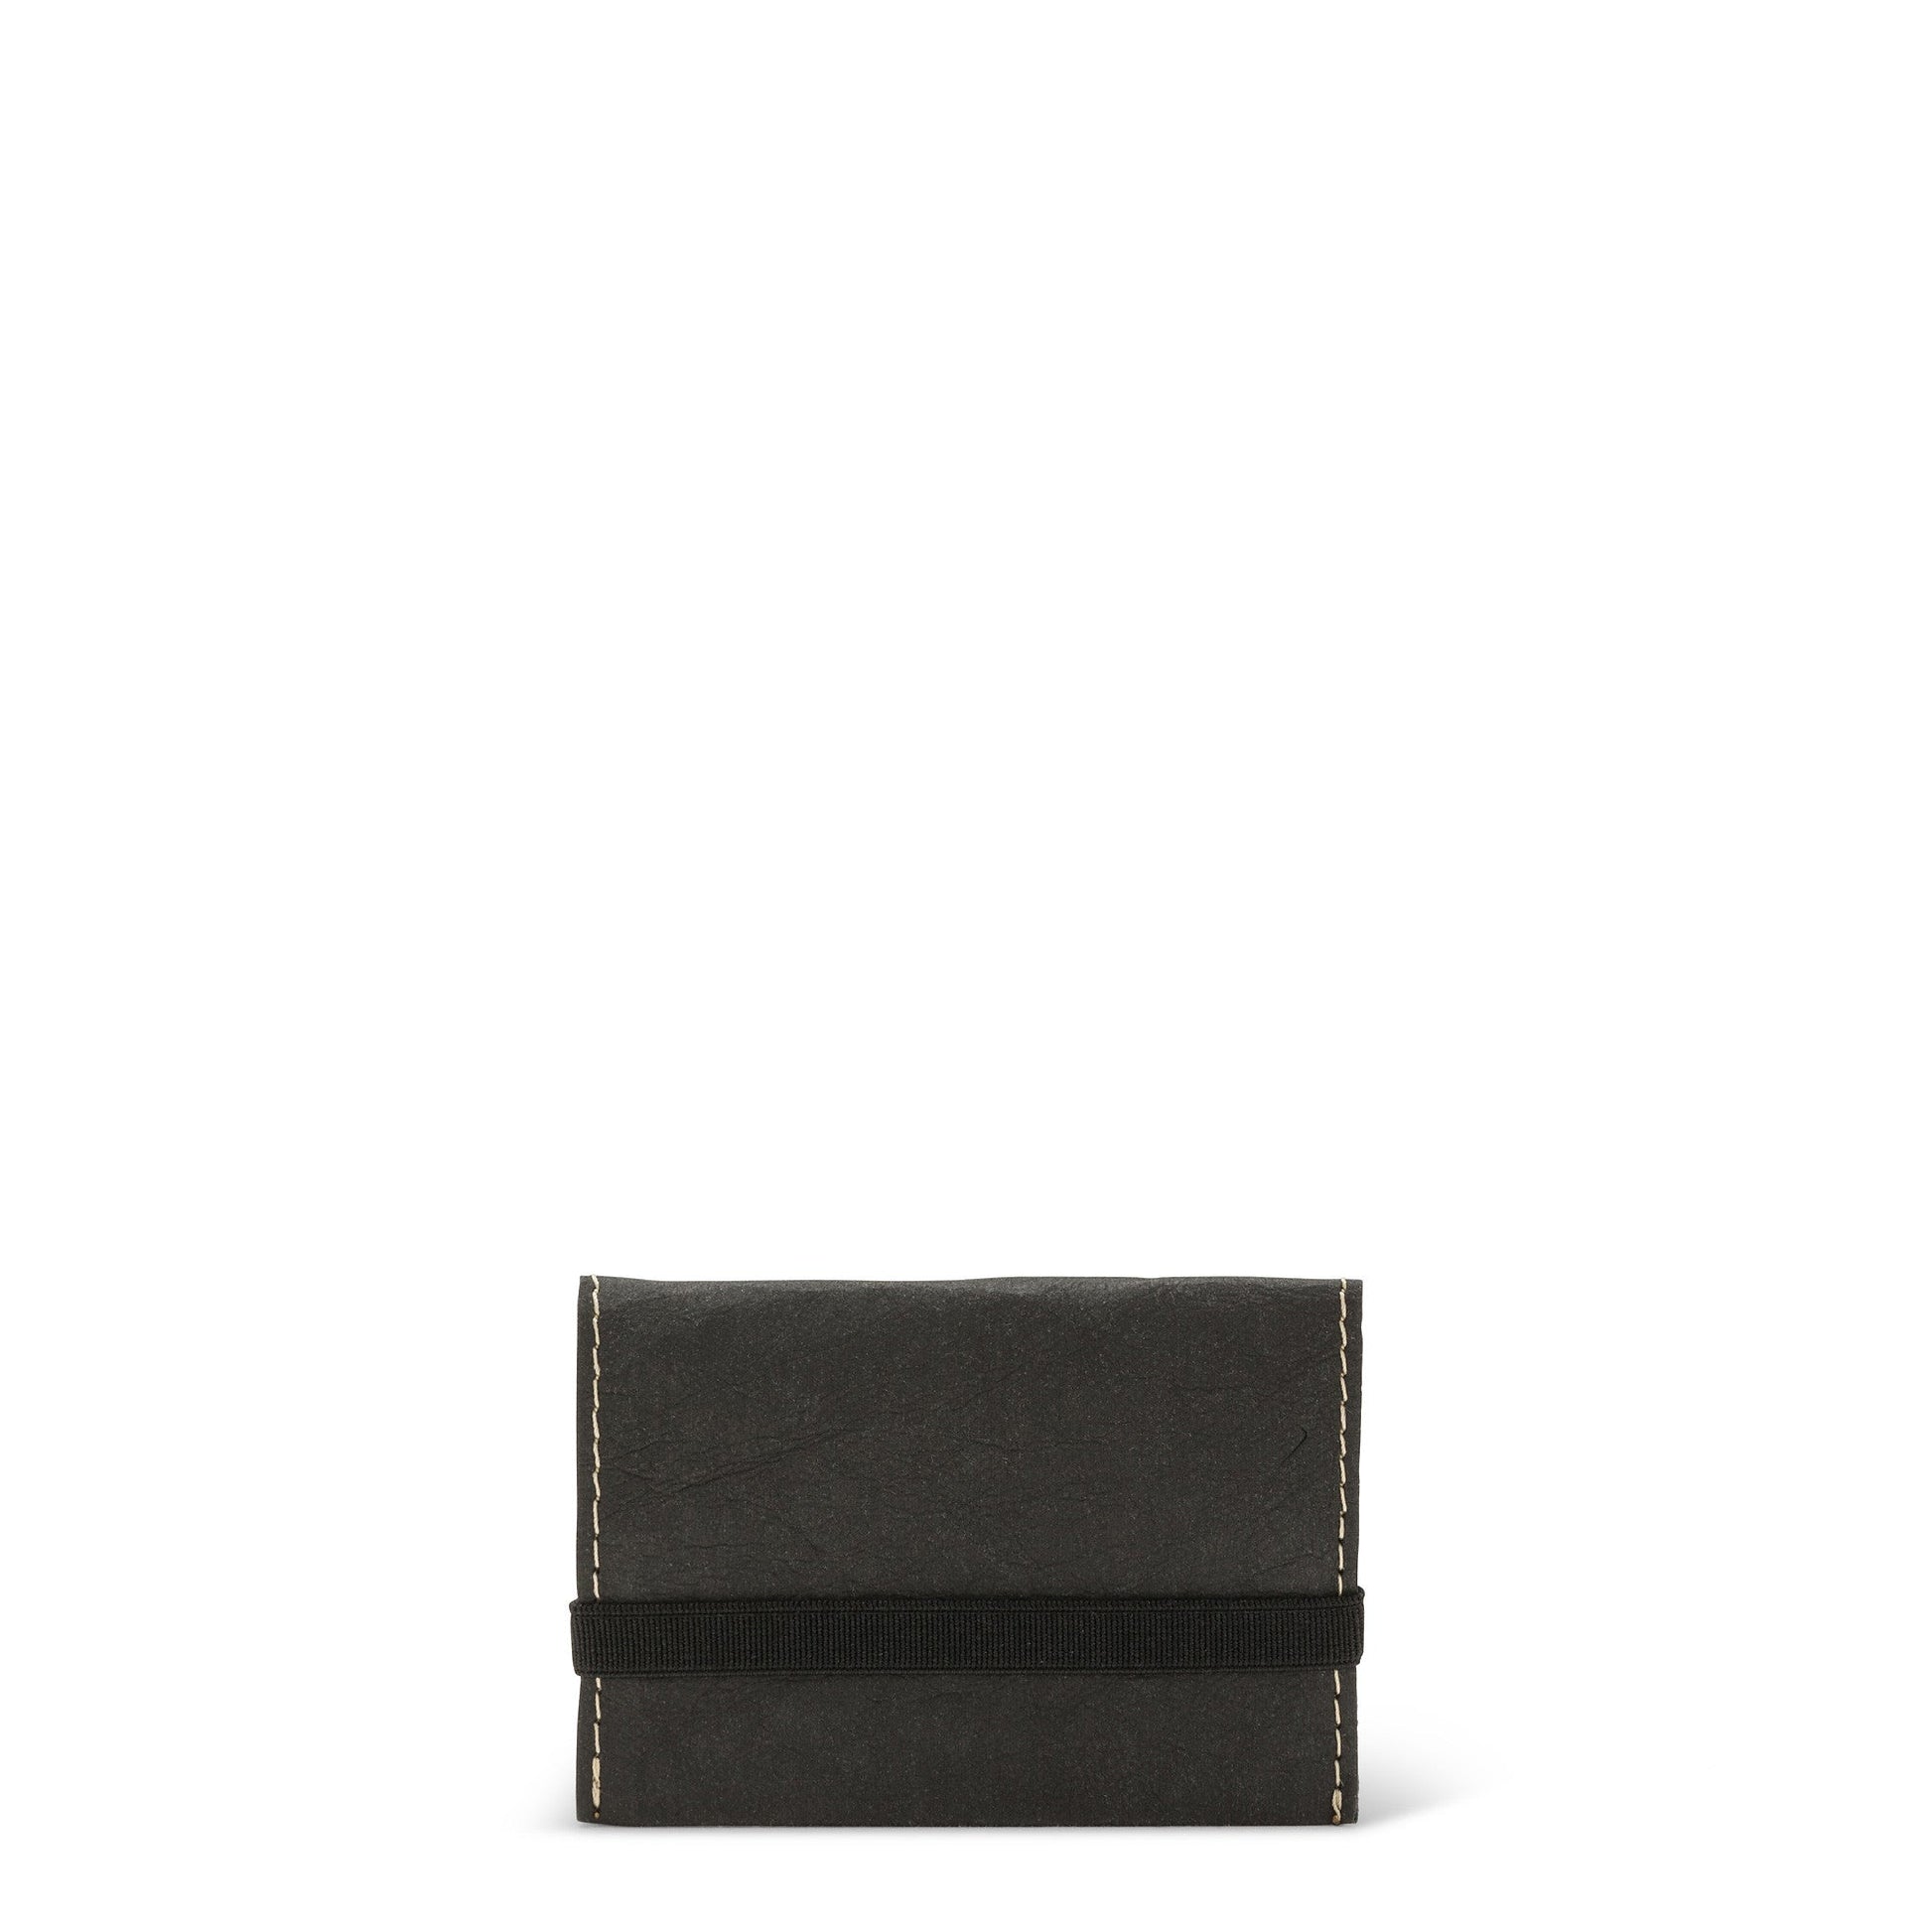 A black washable paper card holder is shown from the front, with an elastic strap closure in black.